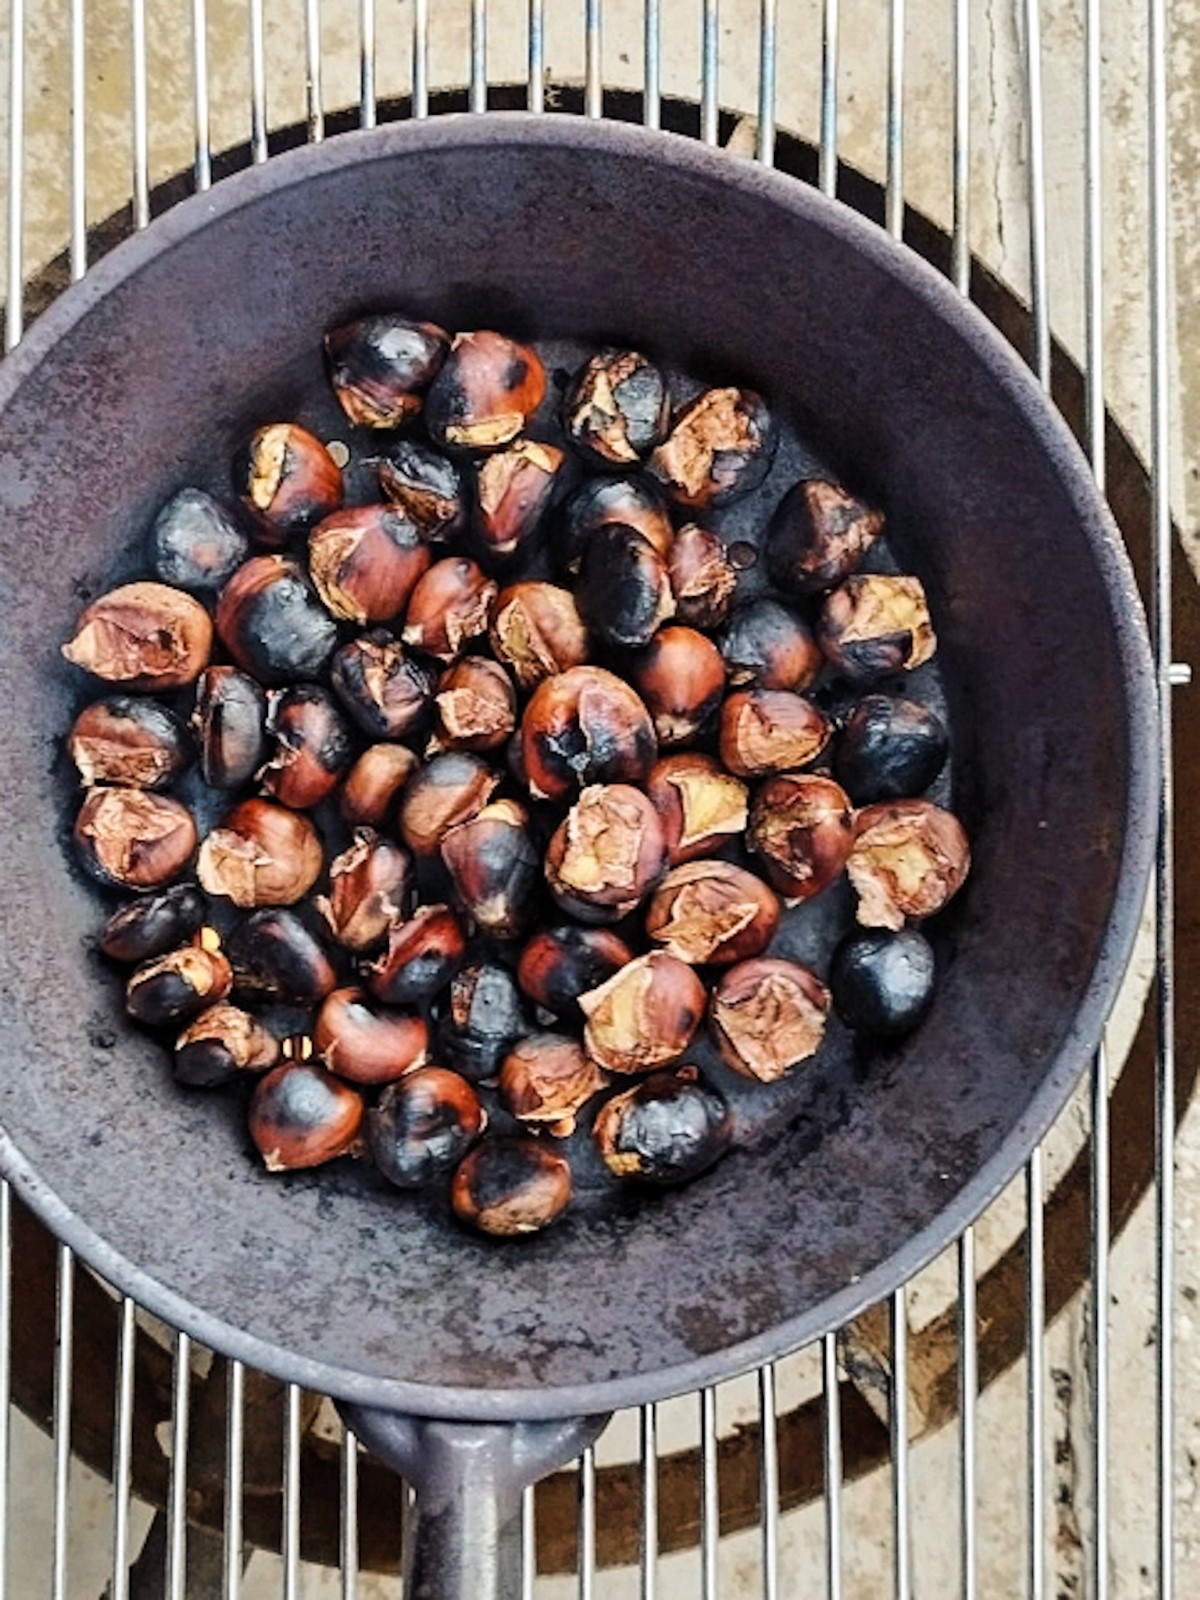 Delicious Roasted Chestnuts - Roasted Chesnuts